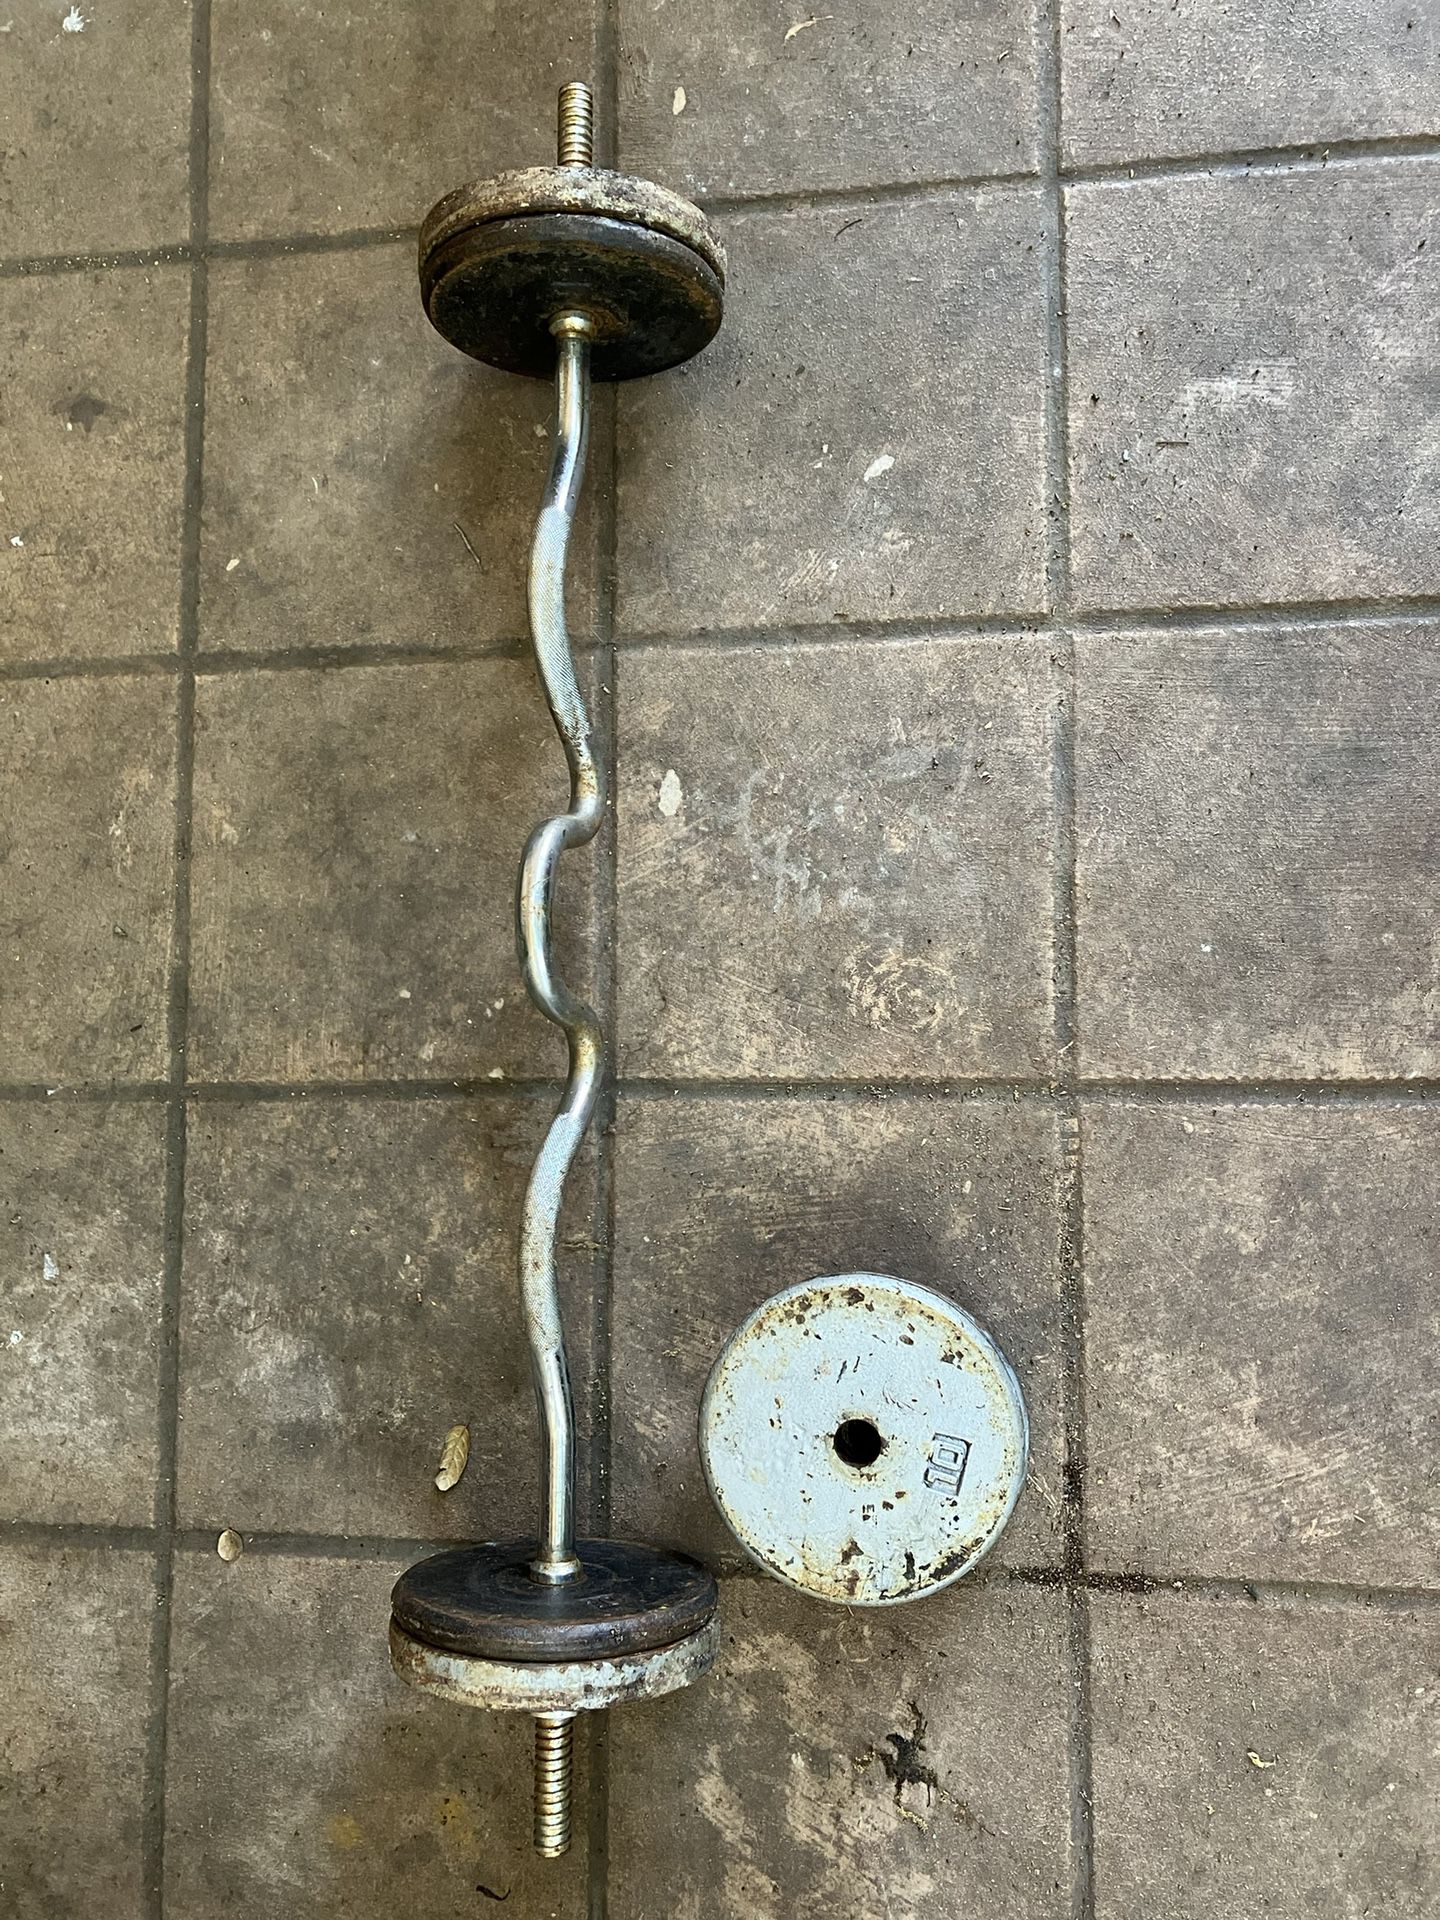 Selling Rugged Iron Curling Bar With 80 Pounds Of Weights 